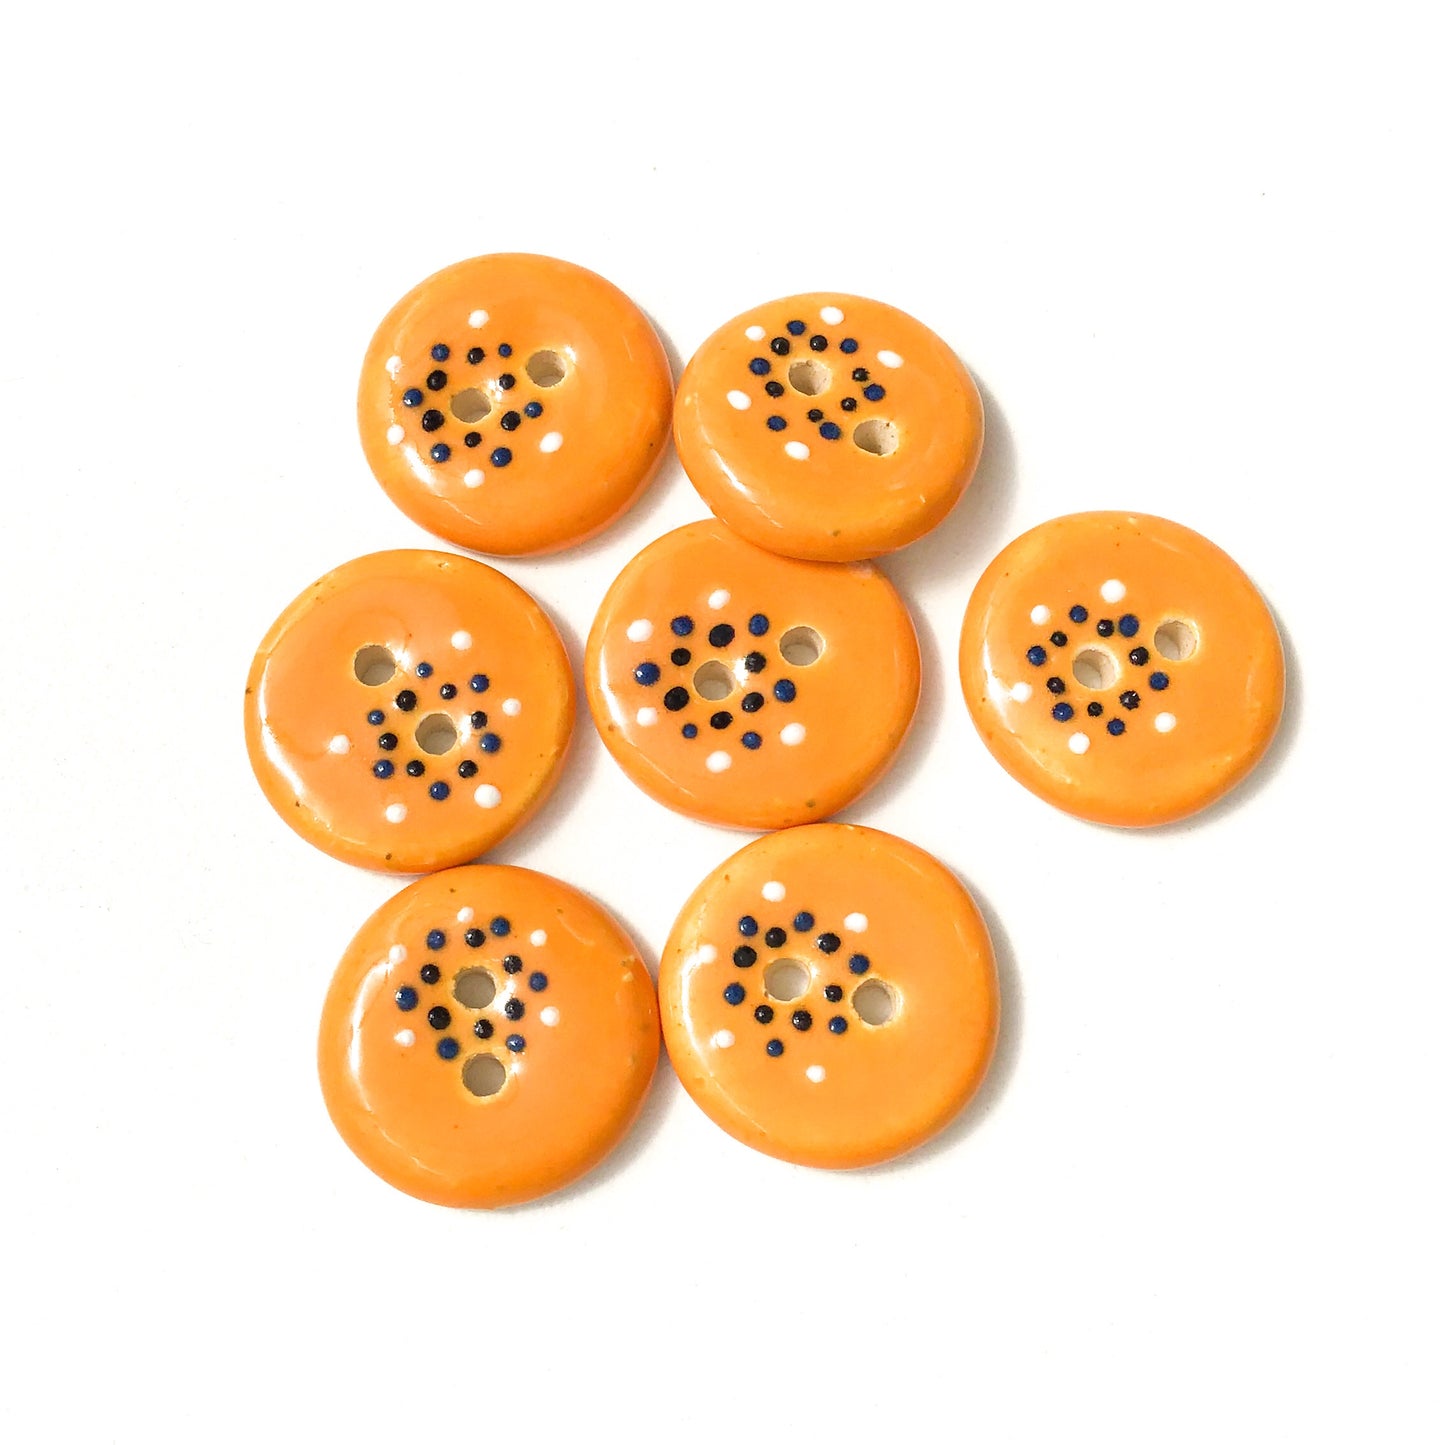 Orange "Spark" Ceramic Buttons - Orange Clay Buttons - 3/4" - 7 Pack